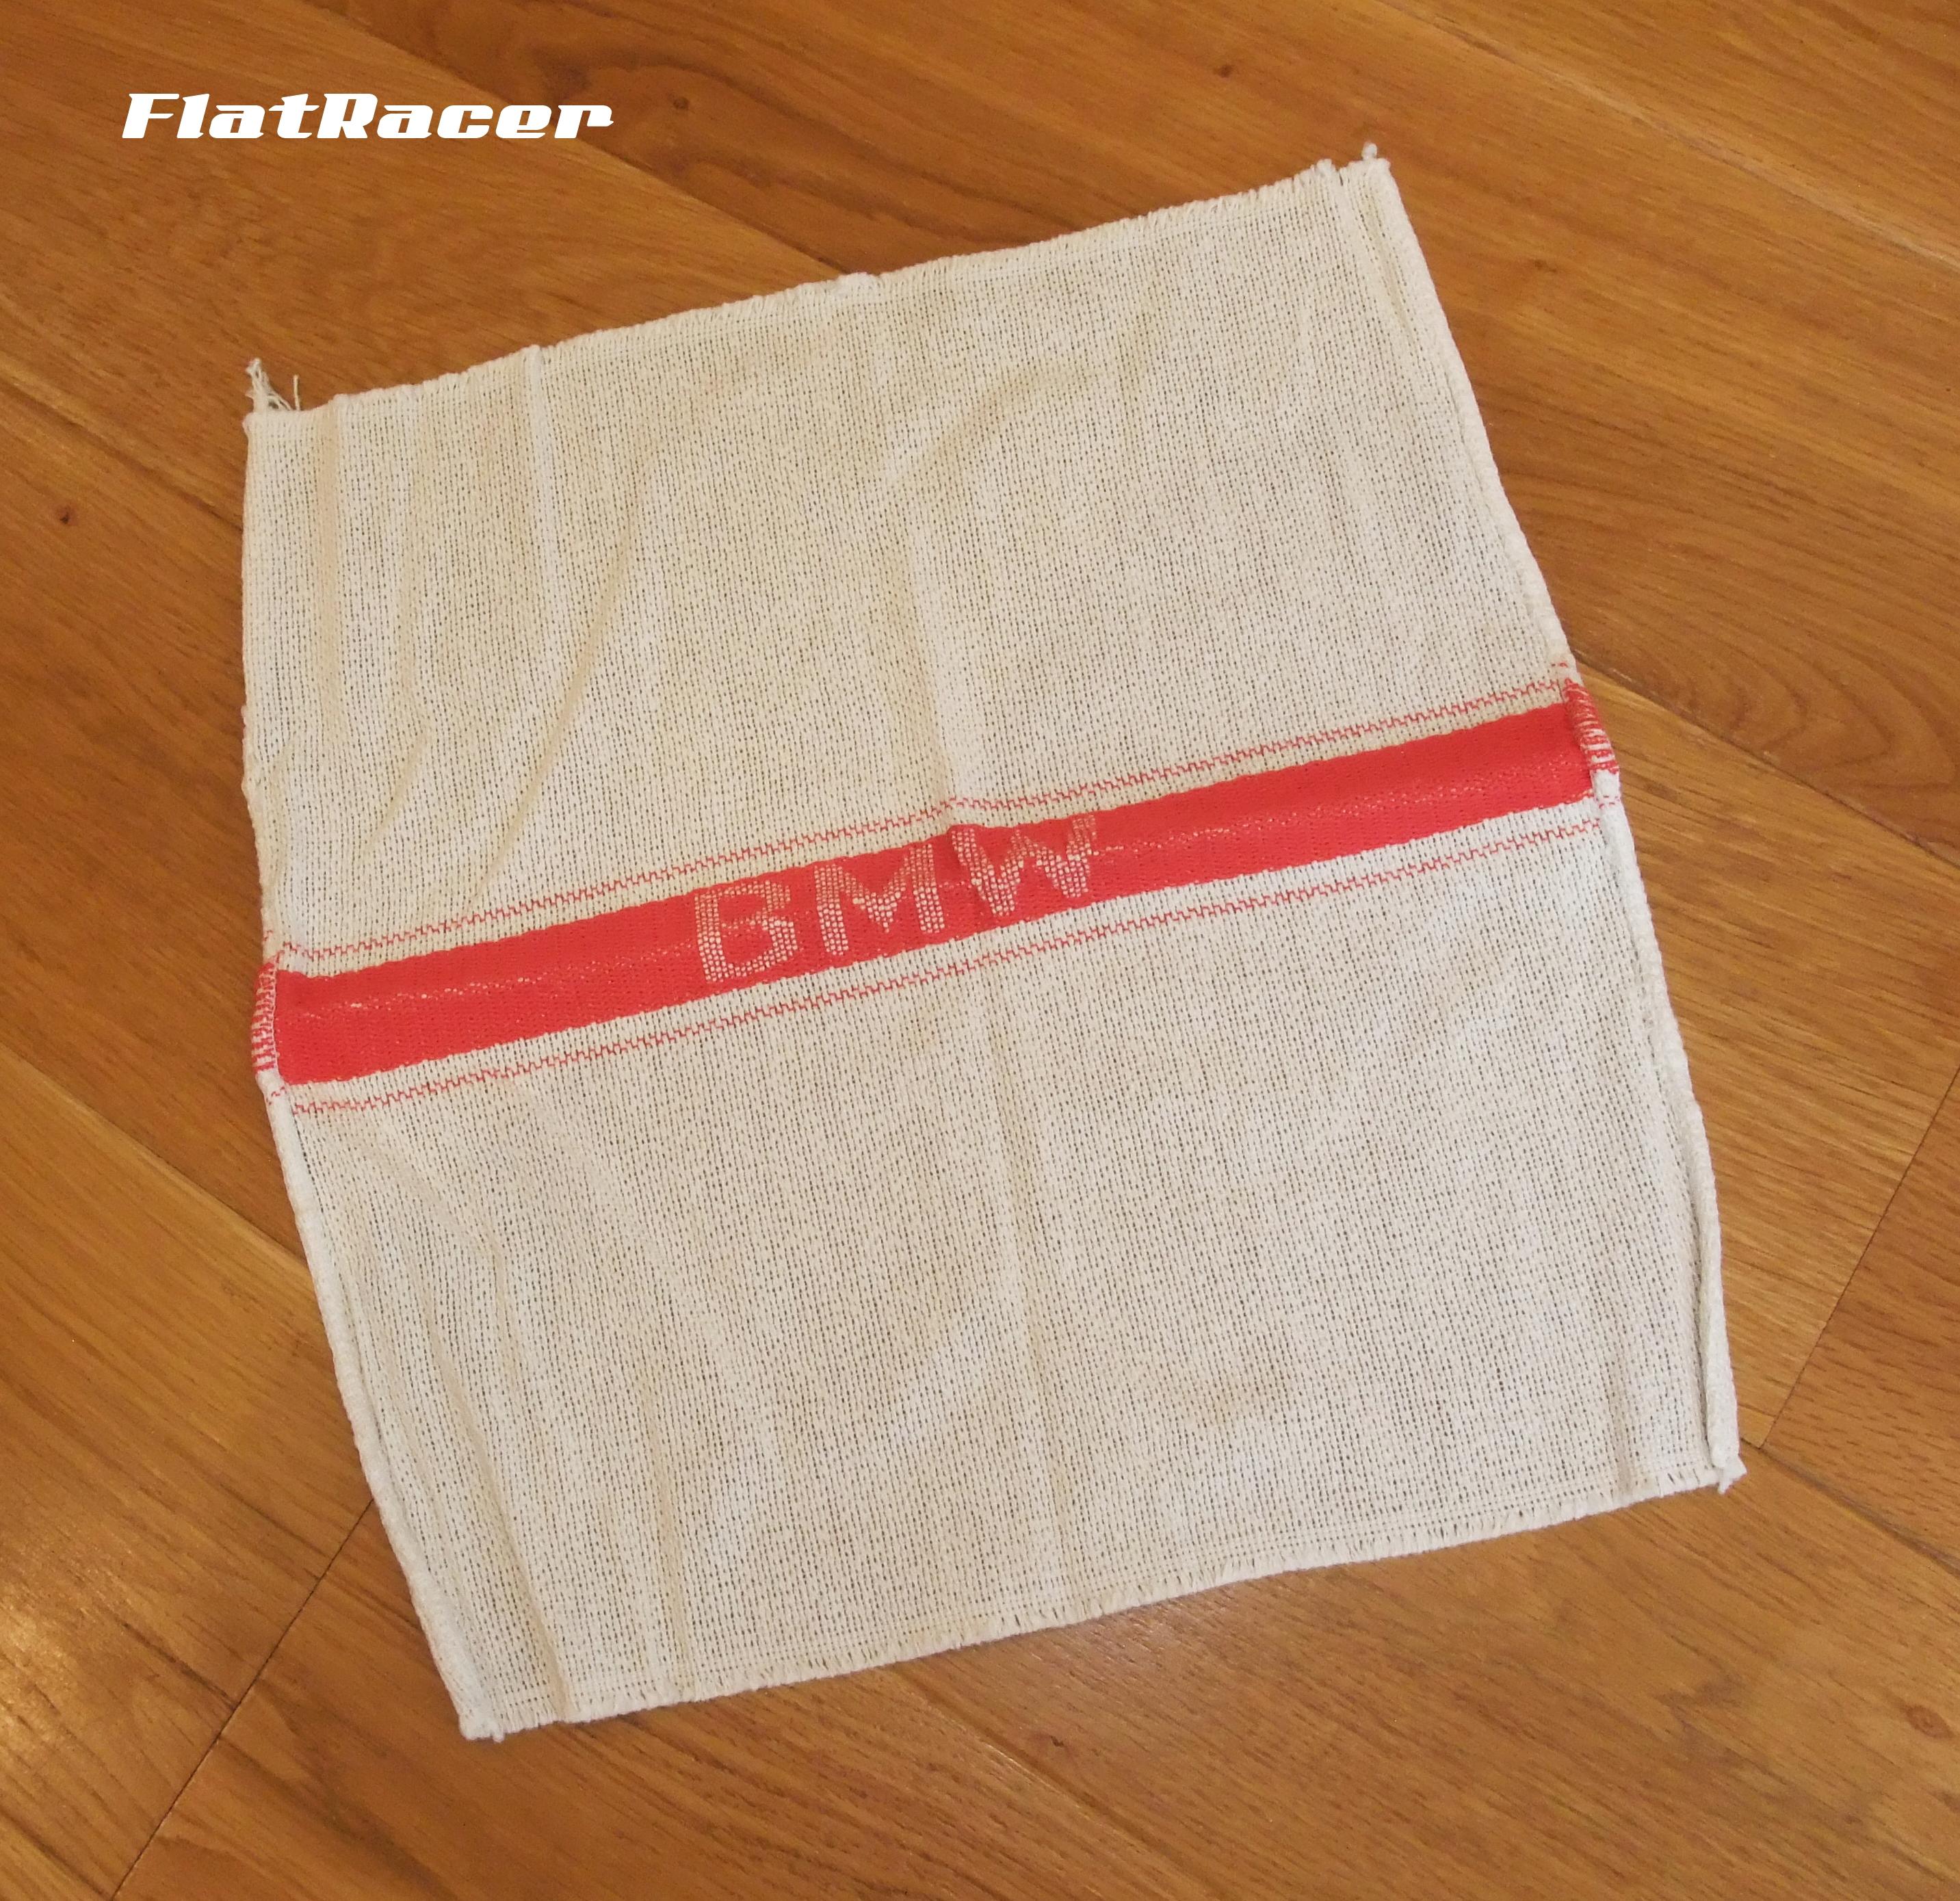 BMW Airhead Boxer tool kit rag towel - red lettering